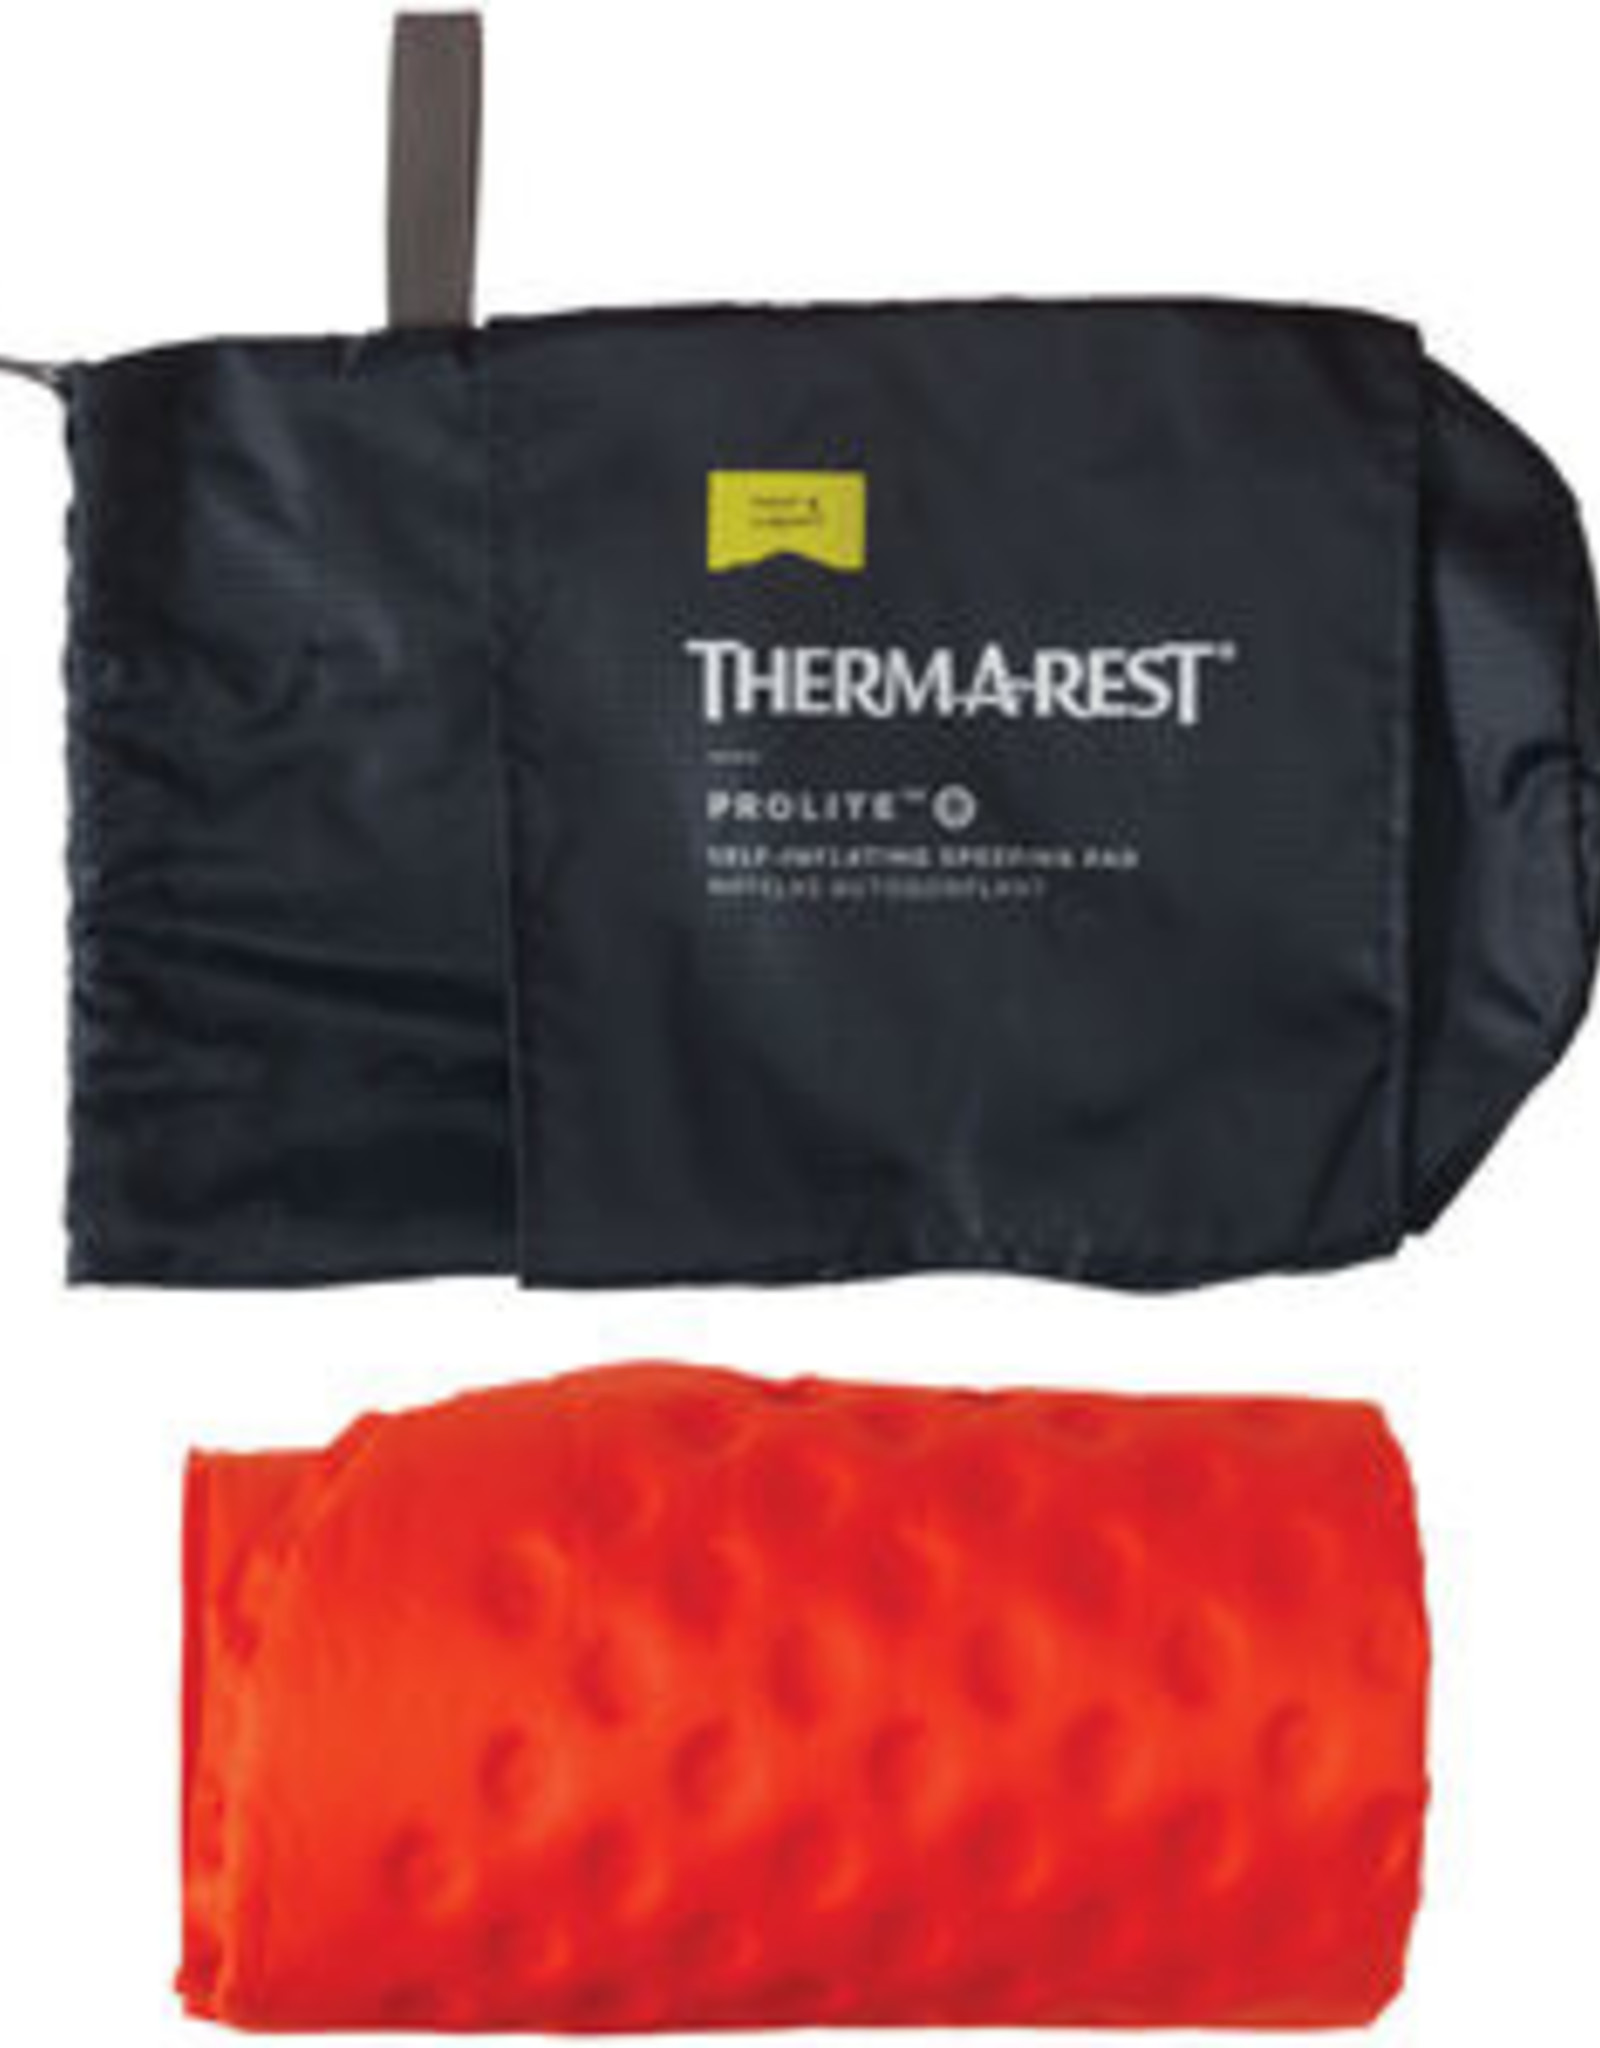 Therm-a-Rest Therm-A-Rest ProLite Sleeping Pad Poppy Regular